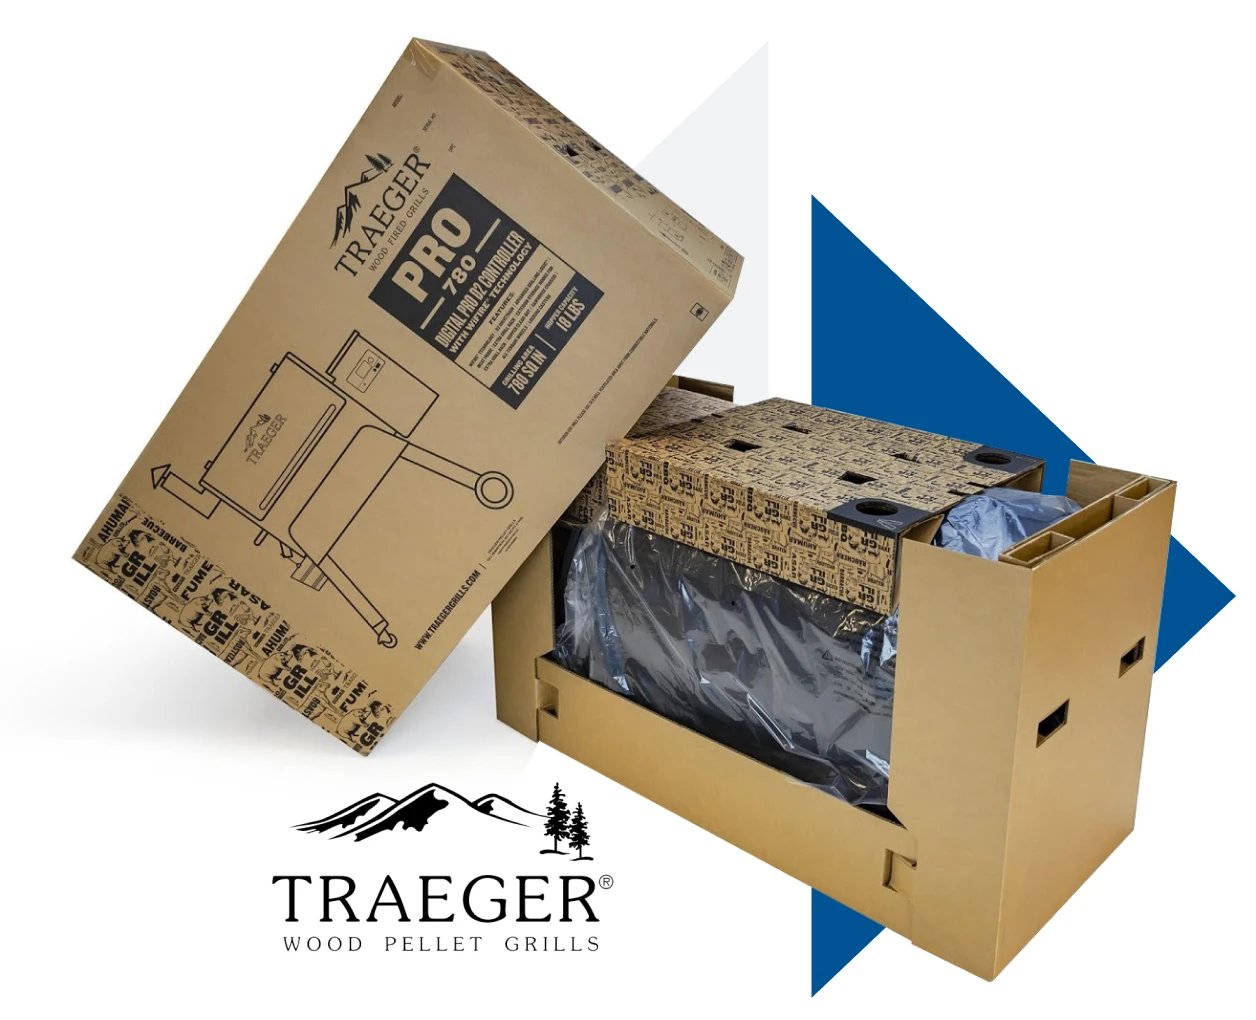 Traeger package